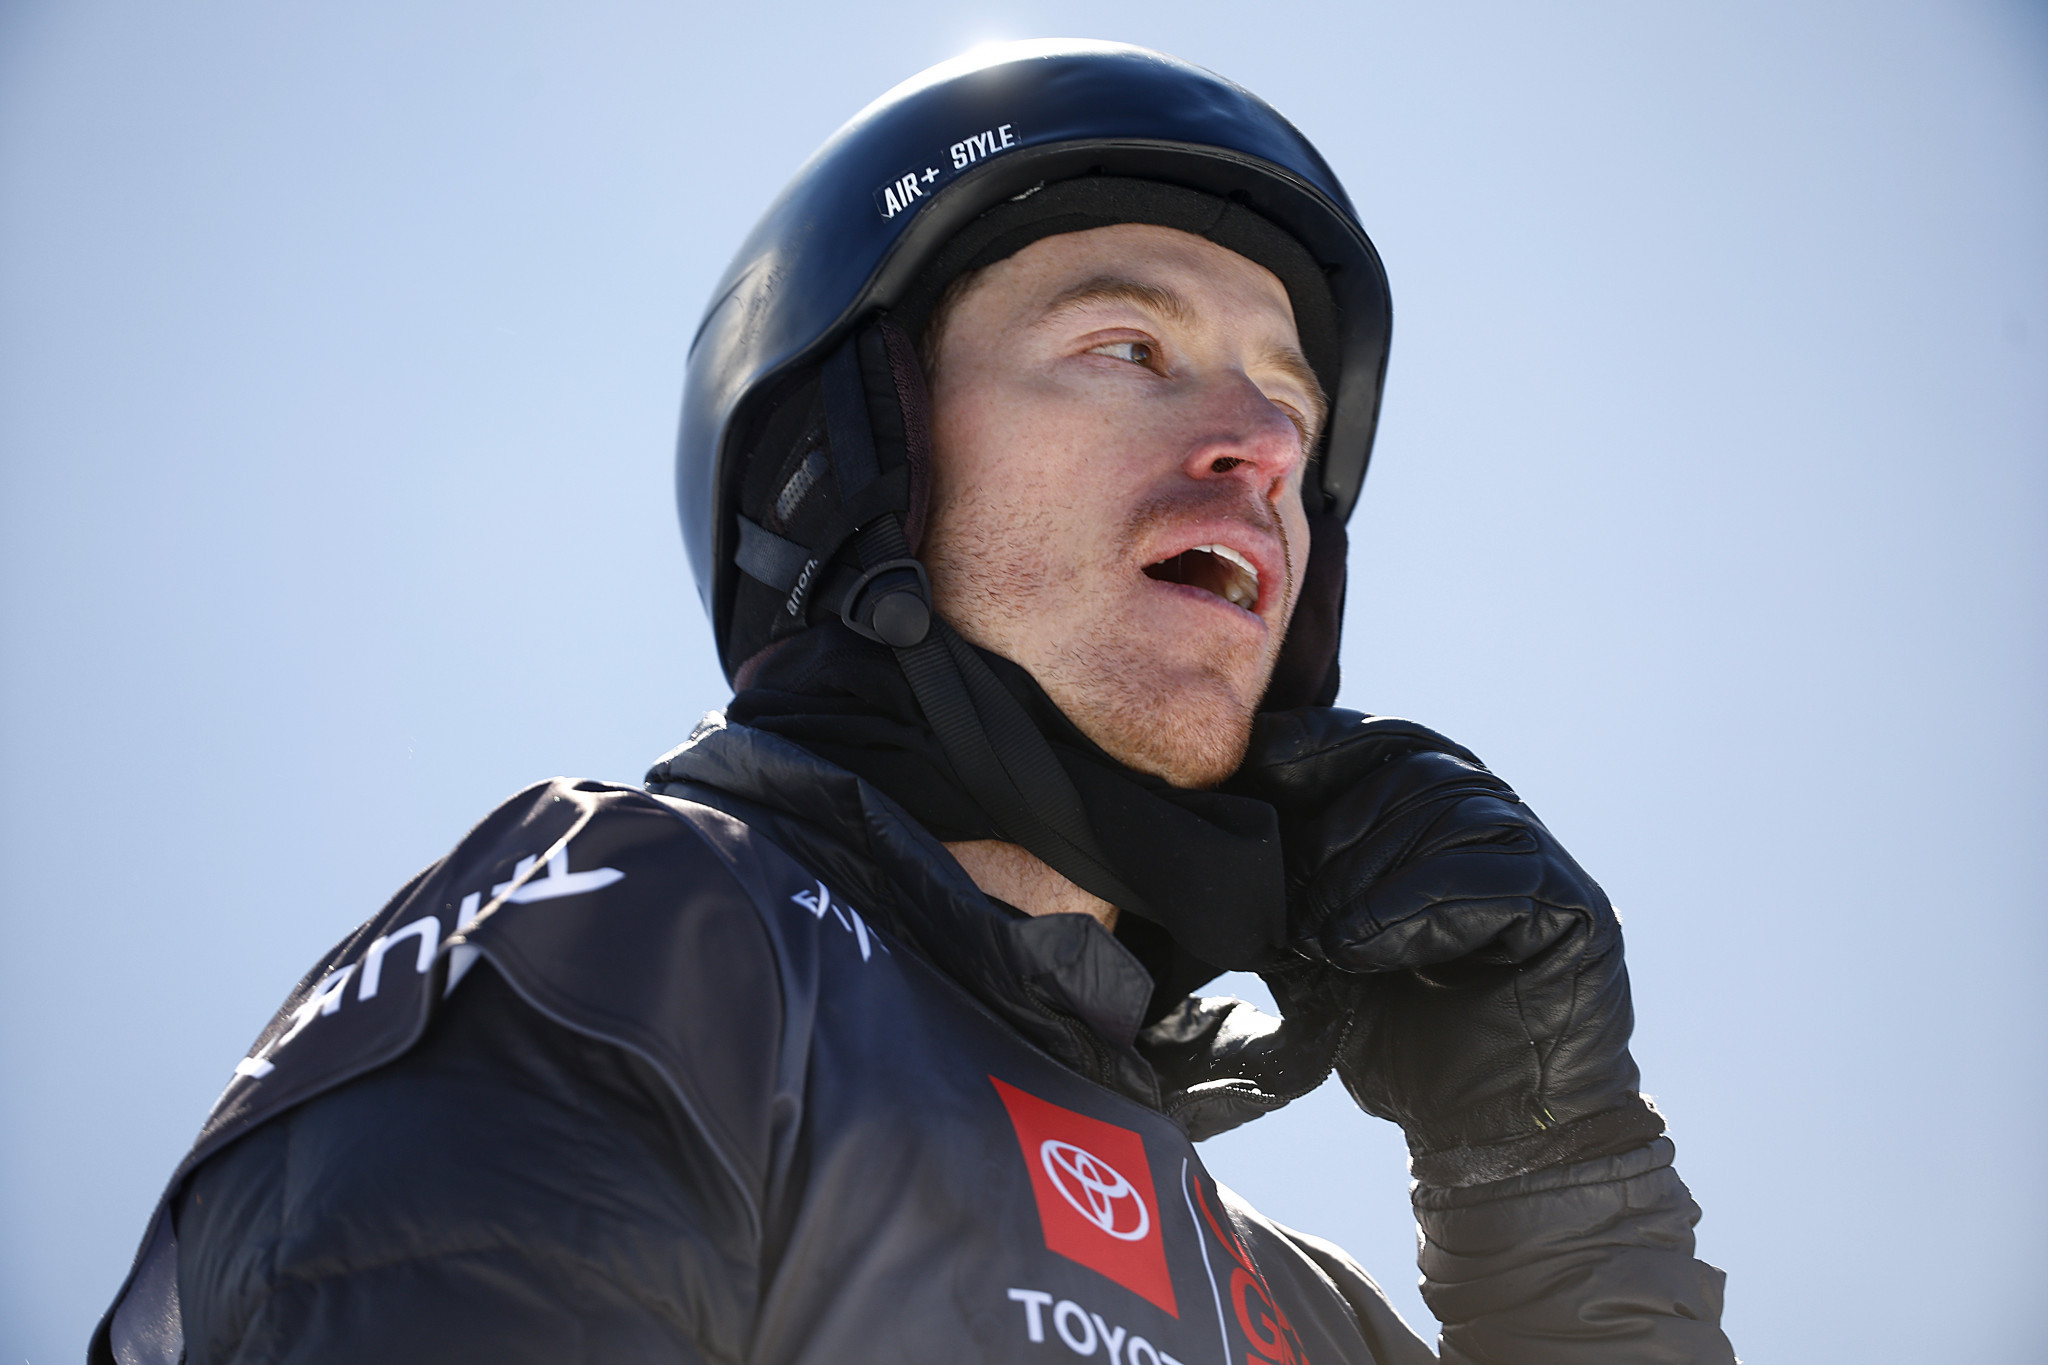 Snowboarding great White expecting Beijing 2022 to be last Olympics and hints at retirement